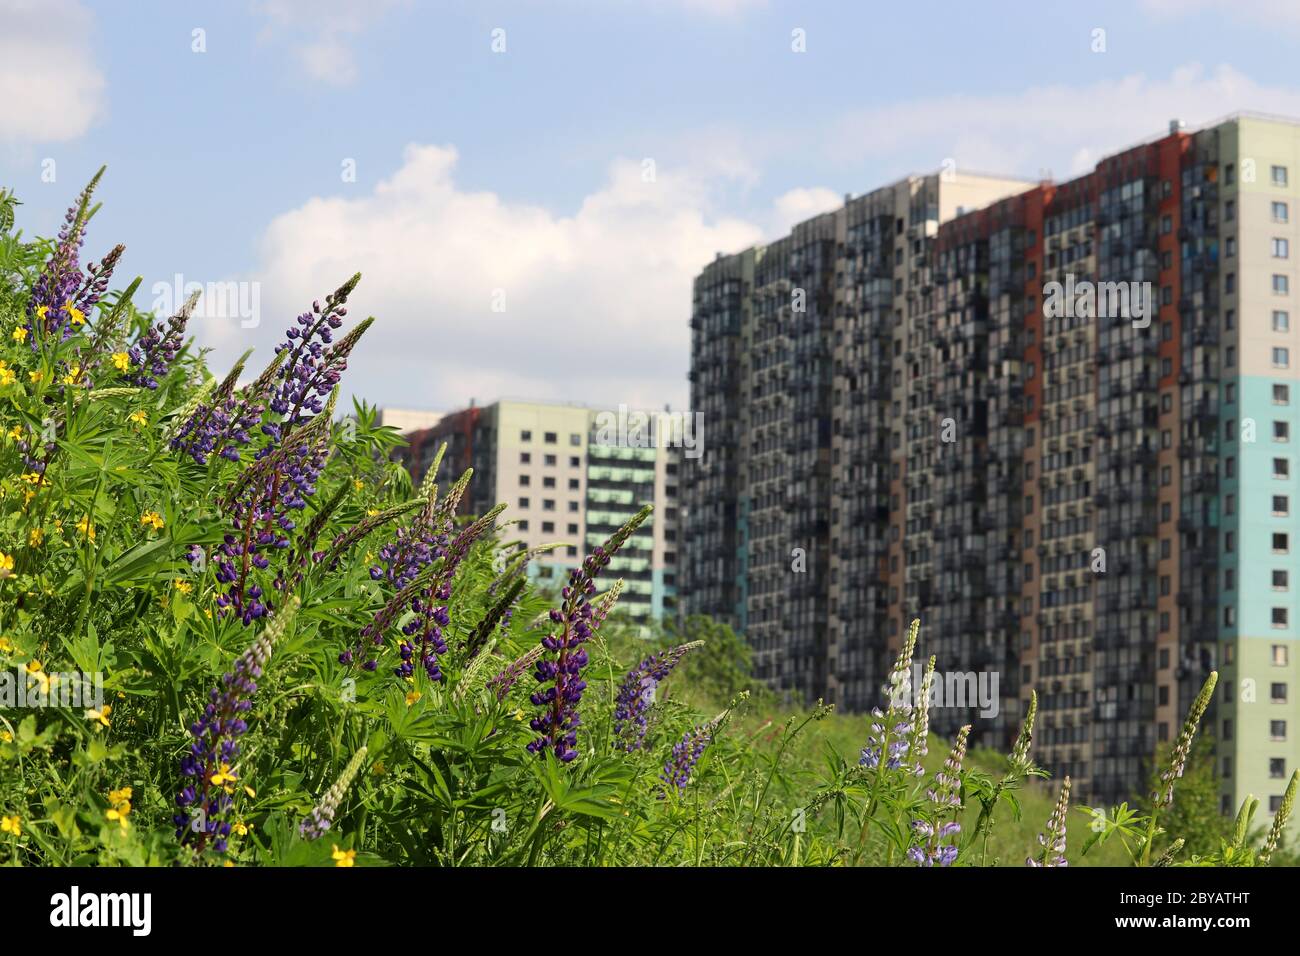 View to the residential buildings from the hill, overgrown with grass and wild flowers of lupin. Concept of ecology in a city, suburb area, eco-friend Stock Photo